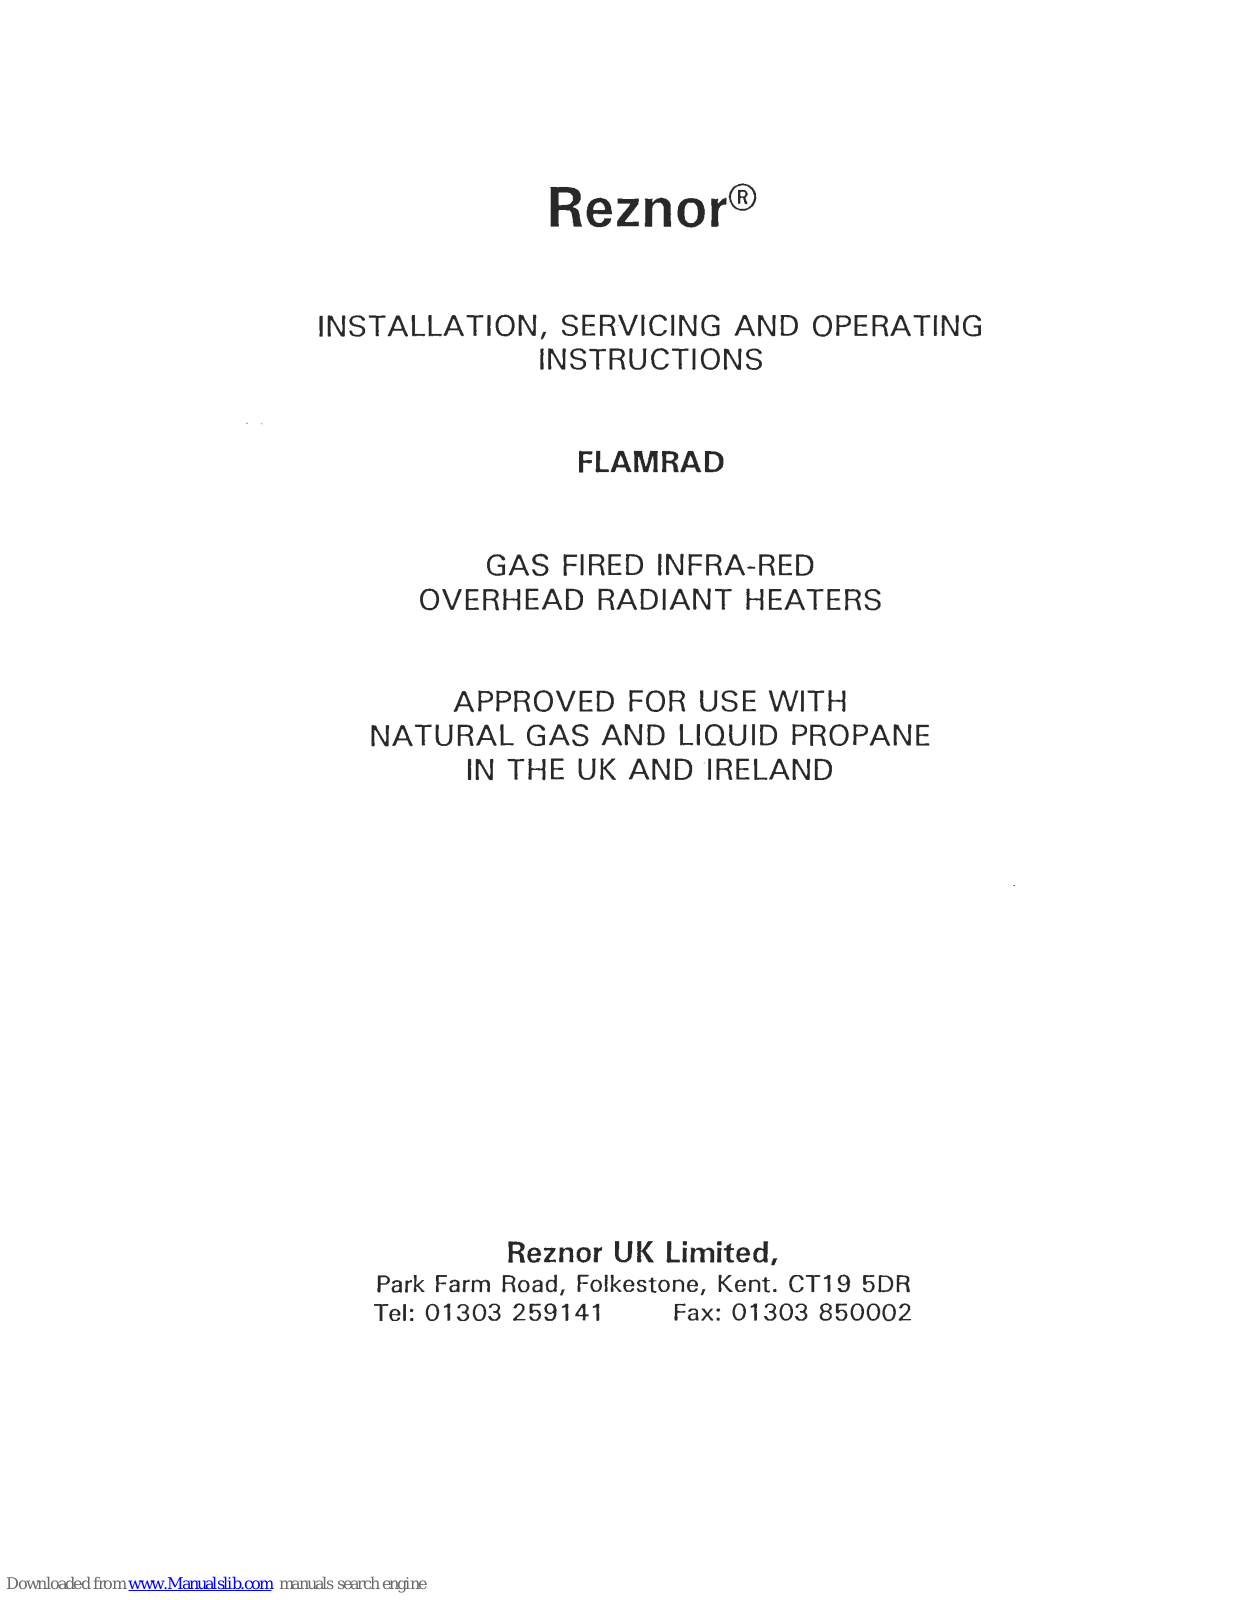 Reznor Flamrad RZ 707 MN, Flamrad RZ 506 MN, Flamrad RZ 514 MN, Flamrad RZ 703 AN, Flamrad RZ 707 AN Installation, Servicing And Operating Instructions